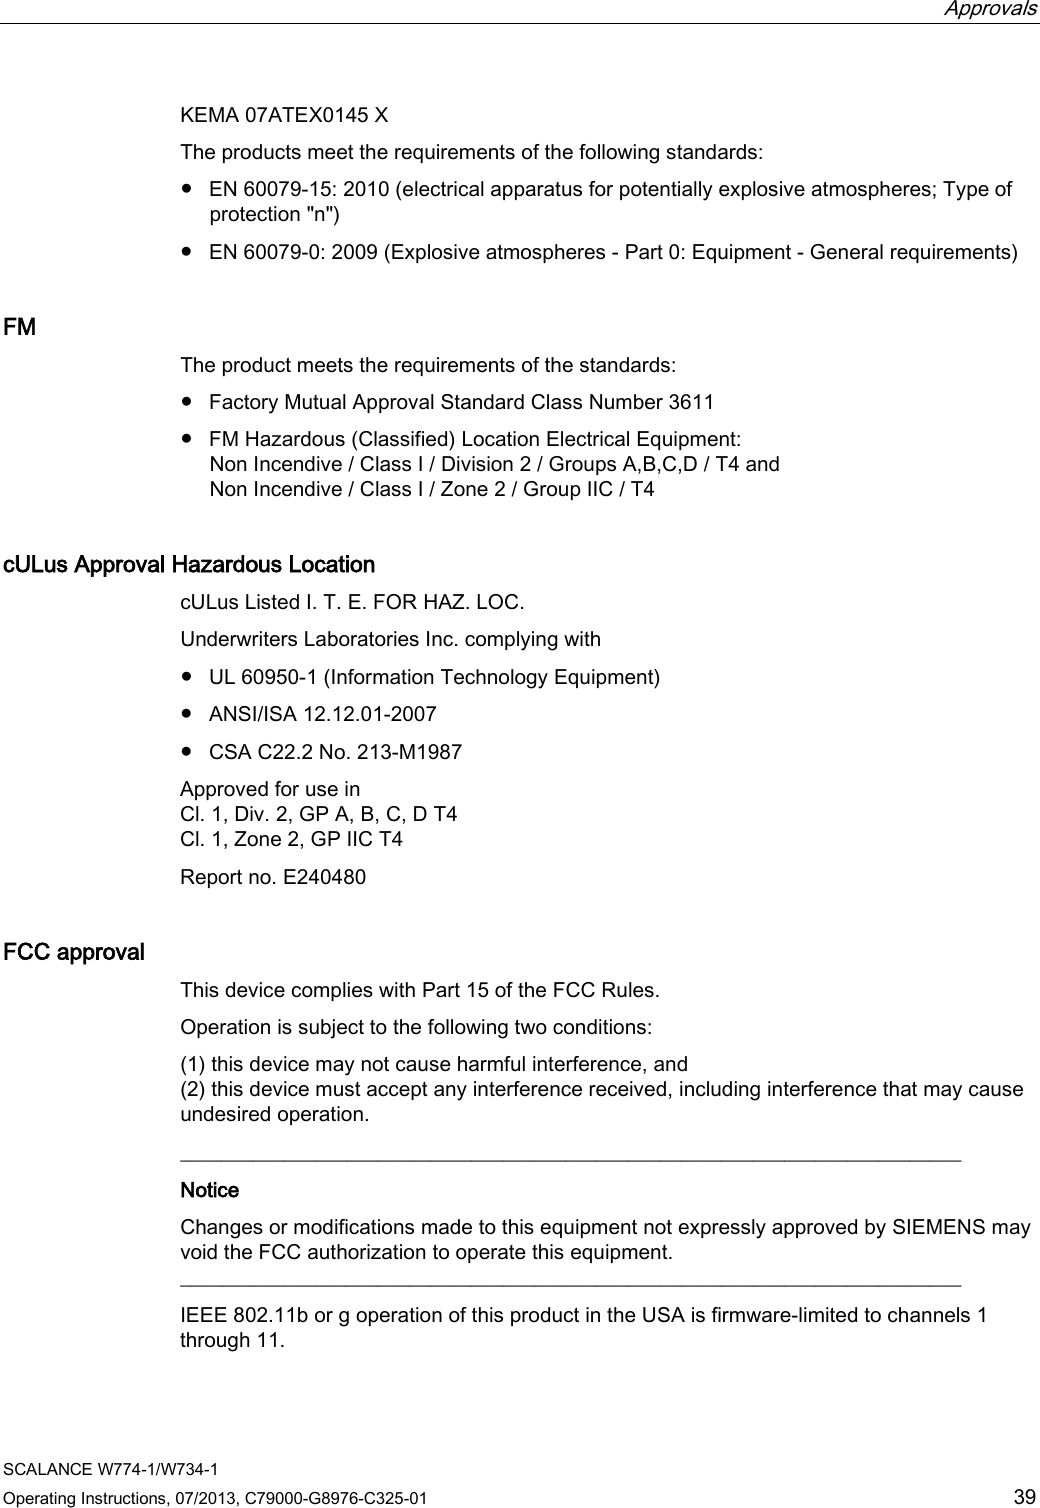  Approvals     SCALANCE W774-1/W734-1 Operating Instructions, 07/2013, C79000-G8976-C325-01 39 KEMA 07ATEX0145 X The products meet the requirements of the following standards: ● EN 60079-15: 2010 (electrical apparatus for potentially explosive atmospheres; Type of protection &quot;n&quot;) ● EN 60079-0: 2009 (Explosive atmospheres - Part 0: Equipment - General requirements) FM The product meets the requirements of the standards: ● Factory Mutual Approval Standard Class Number 3611 ● FM Hazardous (Classified) Location Electrical Equipment: Non Incendive / Class I / Division 2 / Groups A,B,C,D / T4 and Non Incendive / Class I / Zone 2 / Group IIC / T4 cULus Approval Hazardous Location cULus Listed I. T. E. FOR HAZ. LOC. Underwriters Laboratories Inc. complying with ● UL 60950-1 (Information Technology Equipment) ● ANSI/ISA 12.12.01-2007 ● CSA C22.2 No. 213-M1987 Approved for use in Cl. 1, Div. 2, GP A, B, C, D T4 Cl. 1, Zone 2, GP IIC T4 Report no. E240480 FCC approval This device complies with Part 15 of the FCC Rules. Operation is subject to the following two conditions: (1) this device may not cause harmful interference, and (2) this device must accept any interference received, including interference that may cause undesired operation. ___________________________________________________________________________ Notice Changes or modifications made to this equipment not expressly approved by SIEMENS may void the FCC authorization to operate this equipment. ___________________________________________________________________________ IEEE 802.11b or g operation of this product in the USA is firmware-limited to channels 1 through 11. 